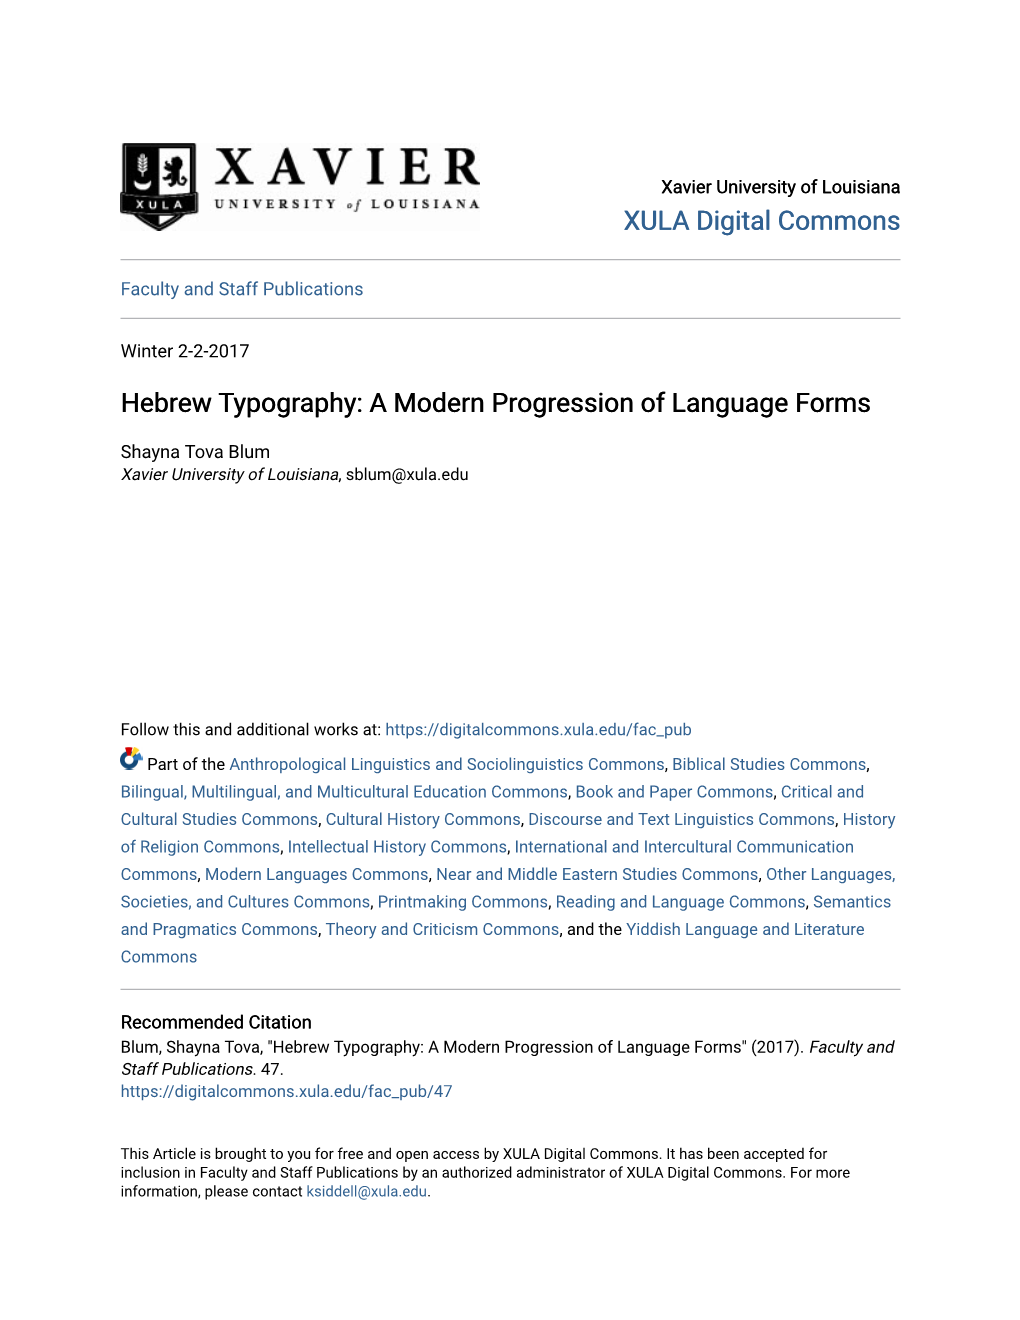 Hebrew Typography: a Modern Progression of Language Forms